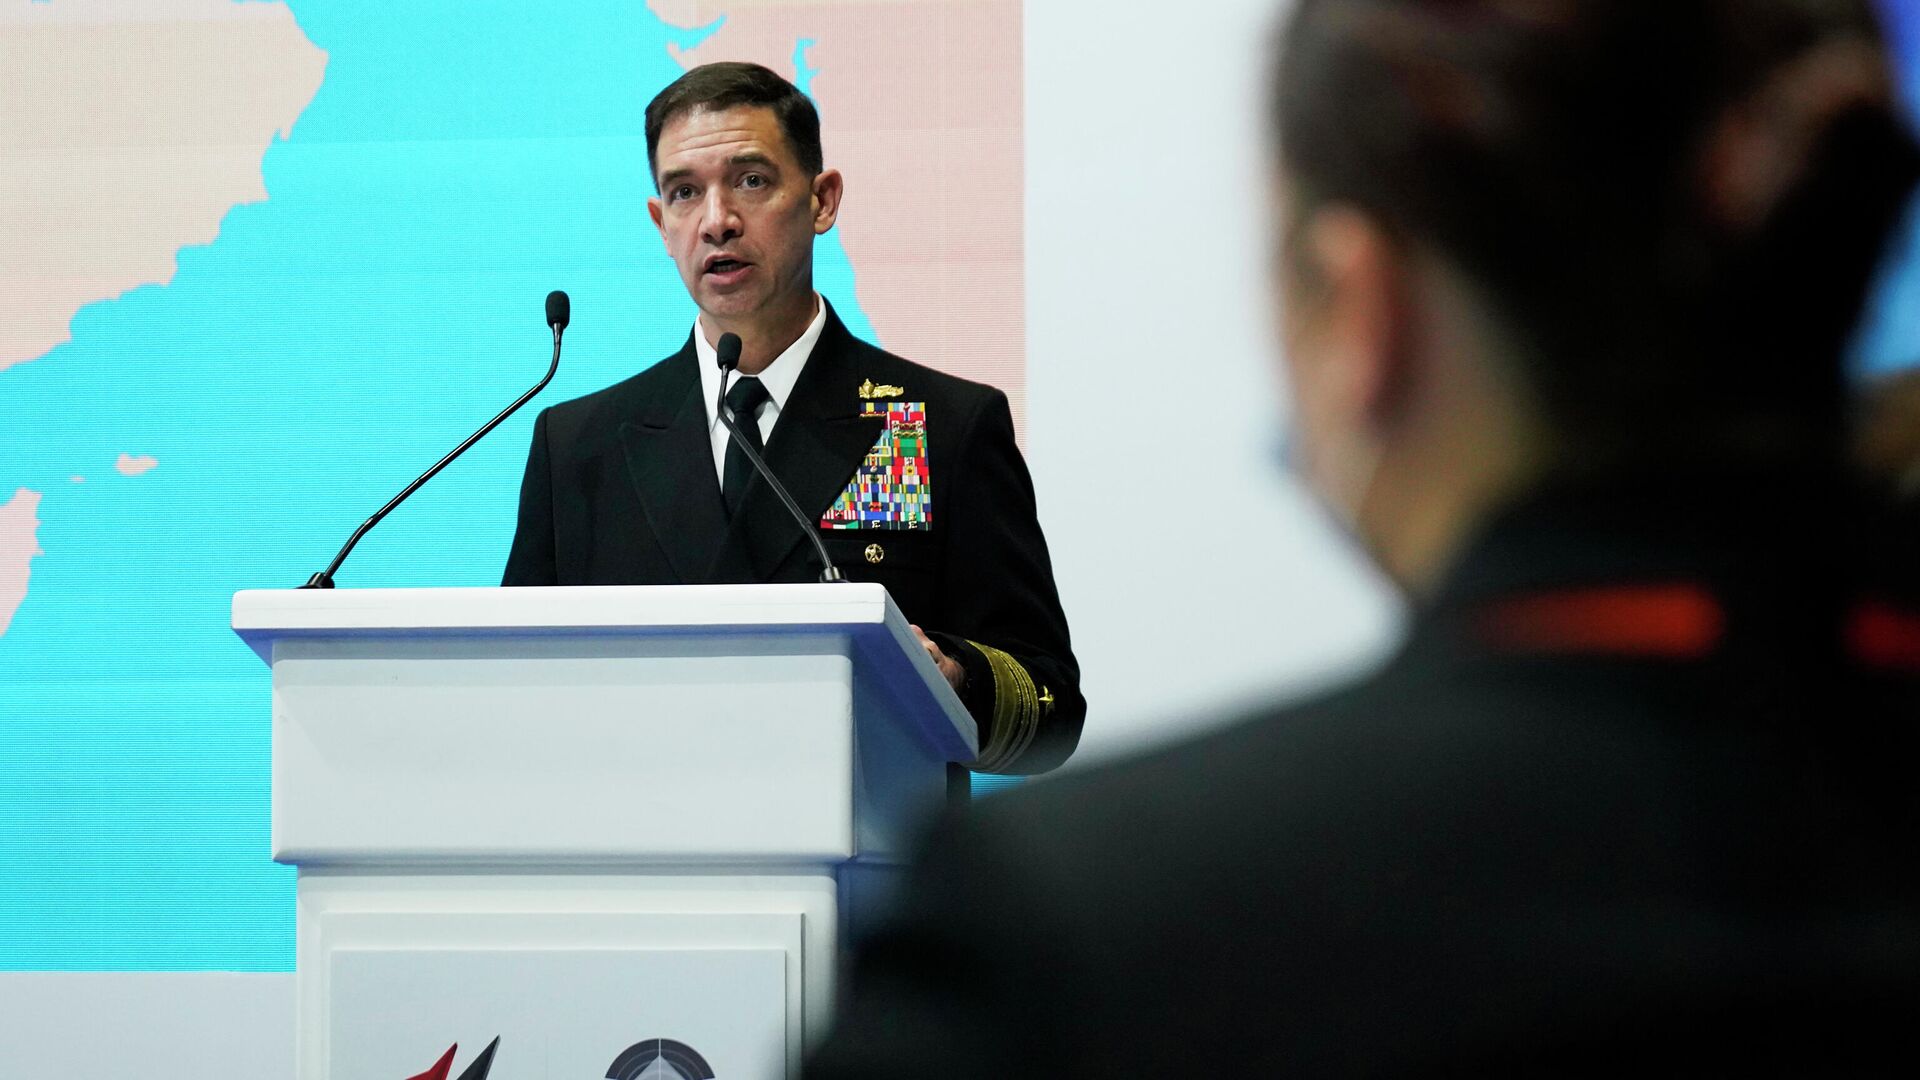 U.S. Navy Vice Adm. Brad Cooper, who oversees the Mideast-based 5th Fleet, speaks at the Unmanned System Exhibition and Conference in Abu Dhabi, United Arab Emirates, Monday, Feb. 21, 2022 - Sputnik International, 1920, 21.02.2022